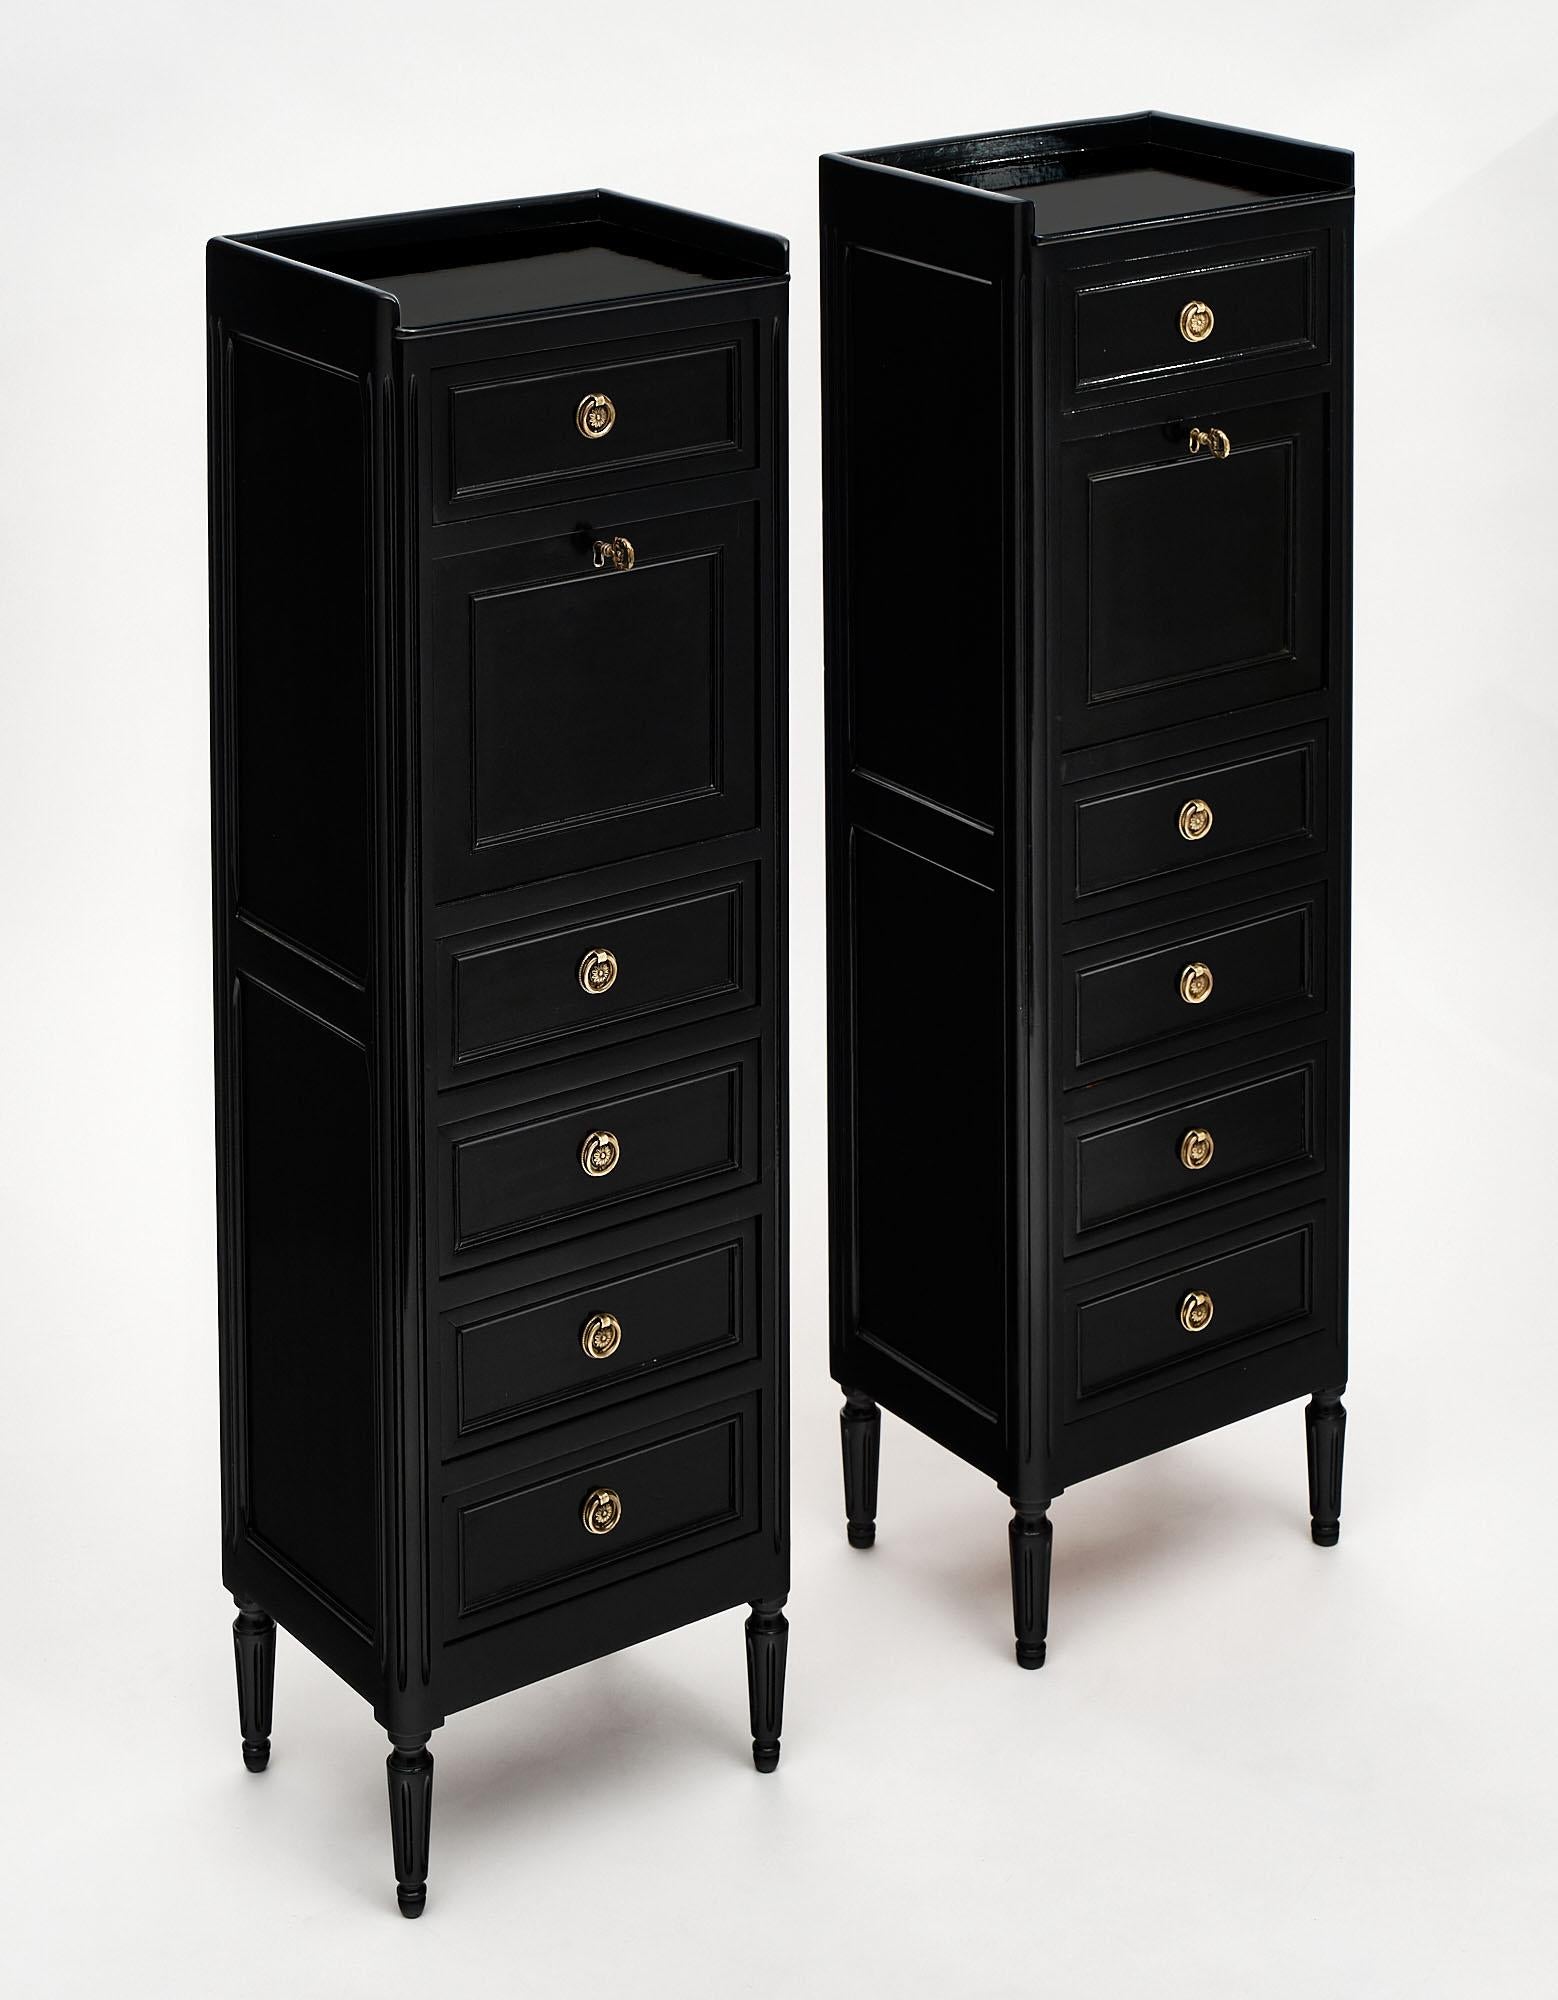 Pair of “secretaires”, French, made of cherry wood in the Louis XVI style. The pair has been ebonized and finished in a lustrous museum quality French polish. We love the drop front opening to an intimate work space with an embossed green leather